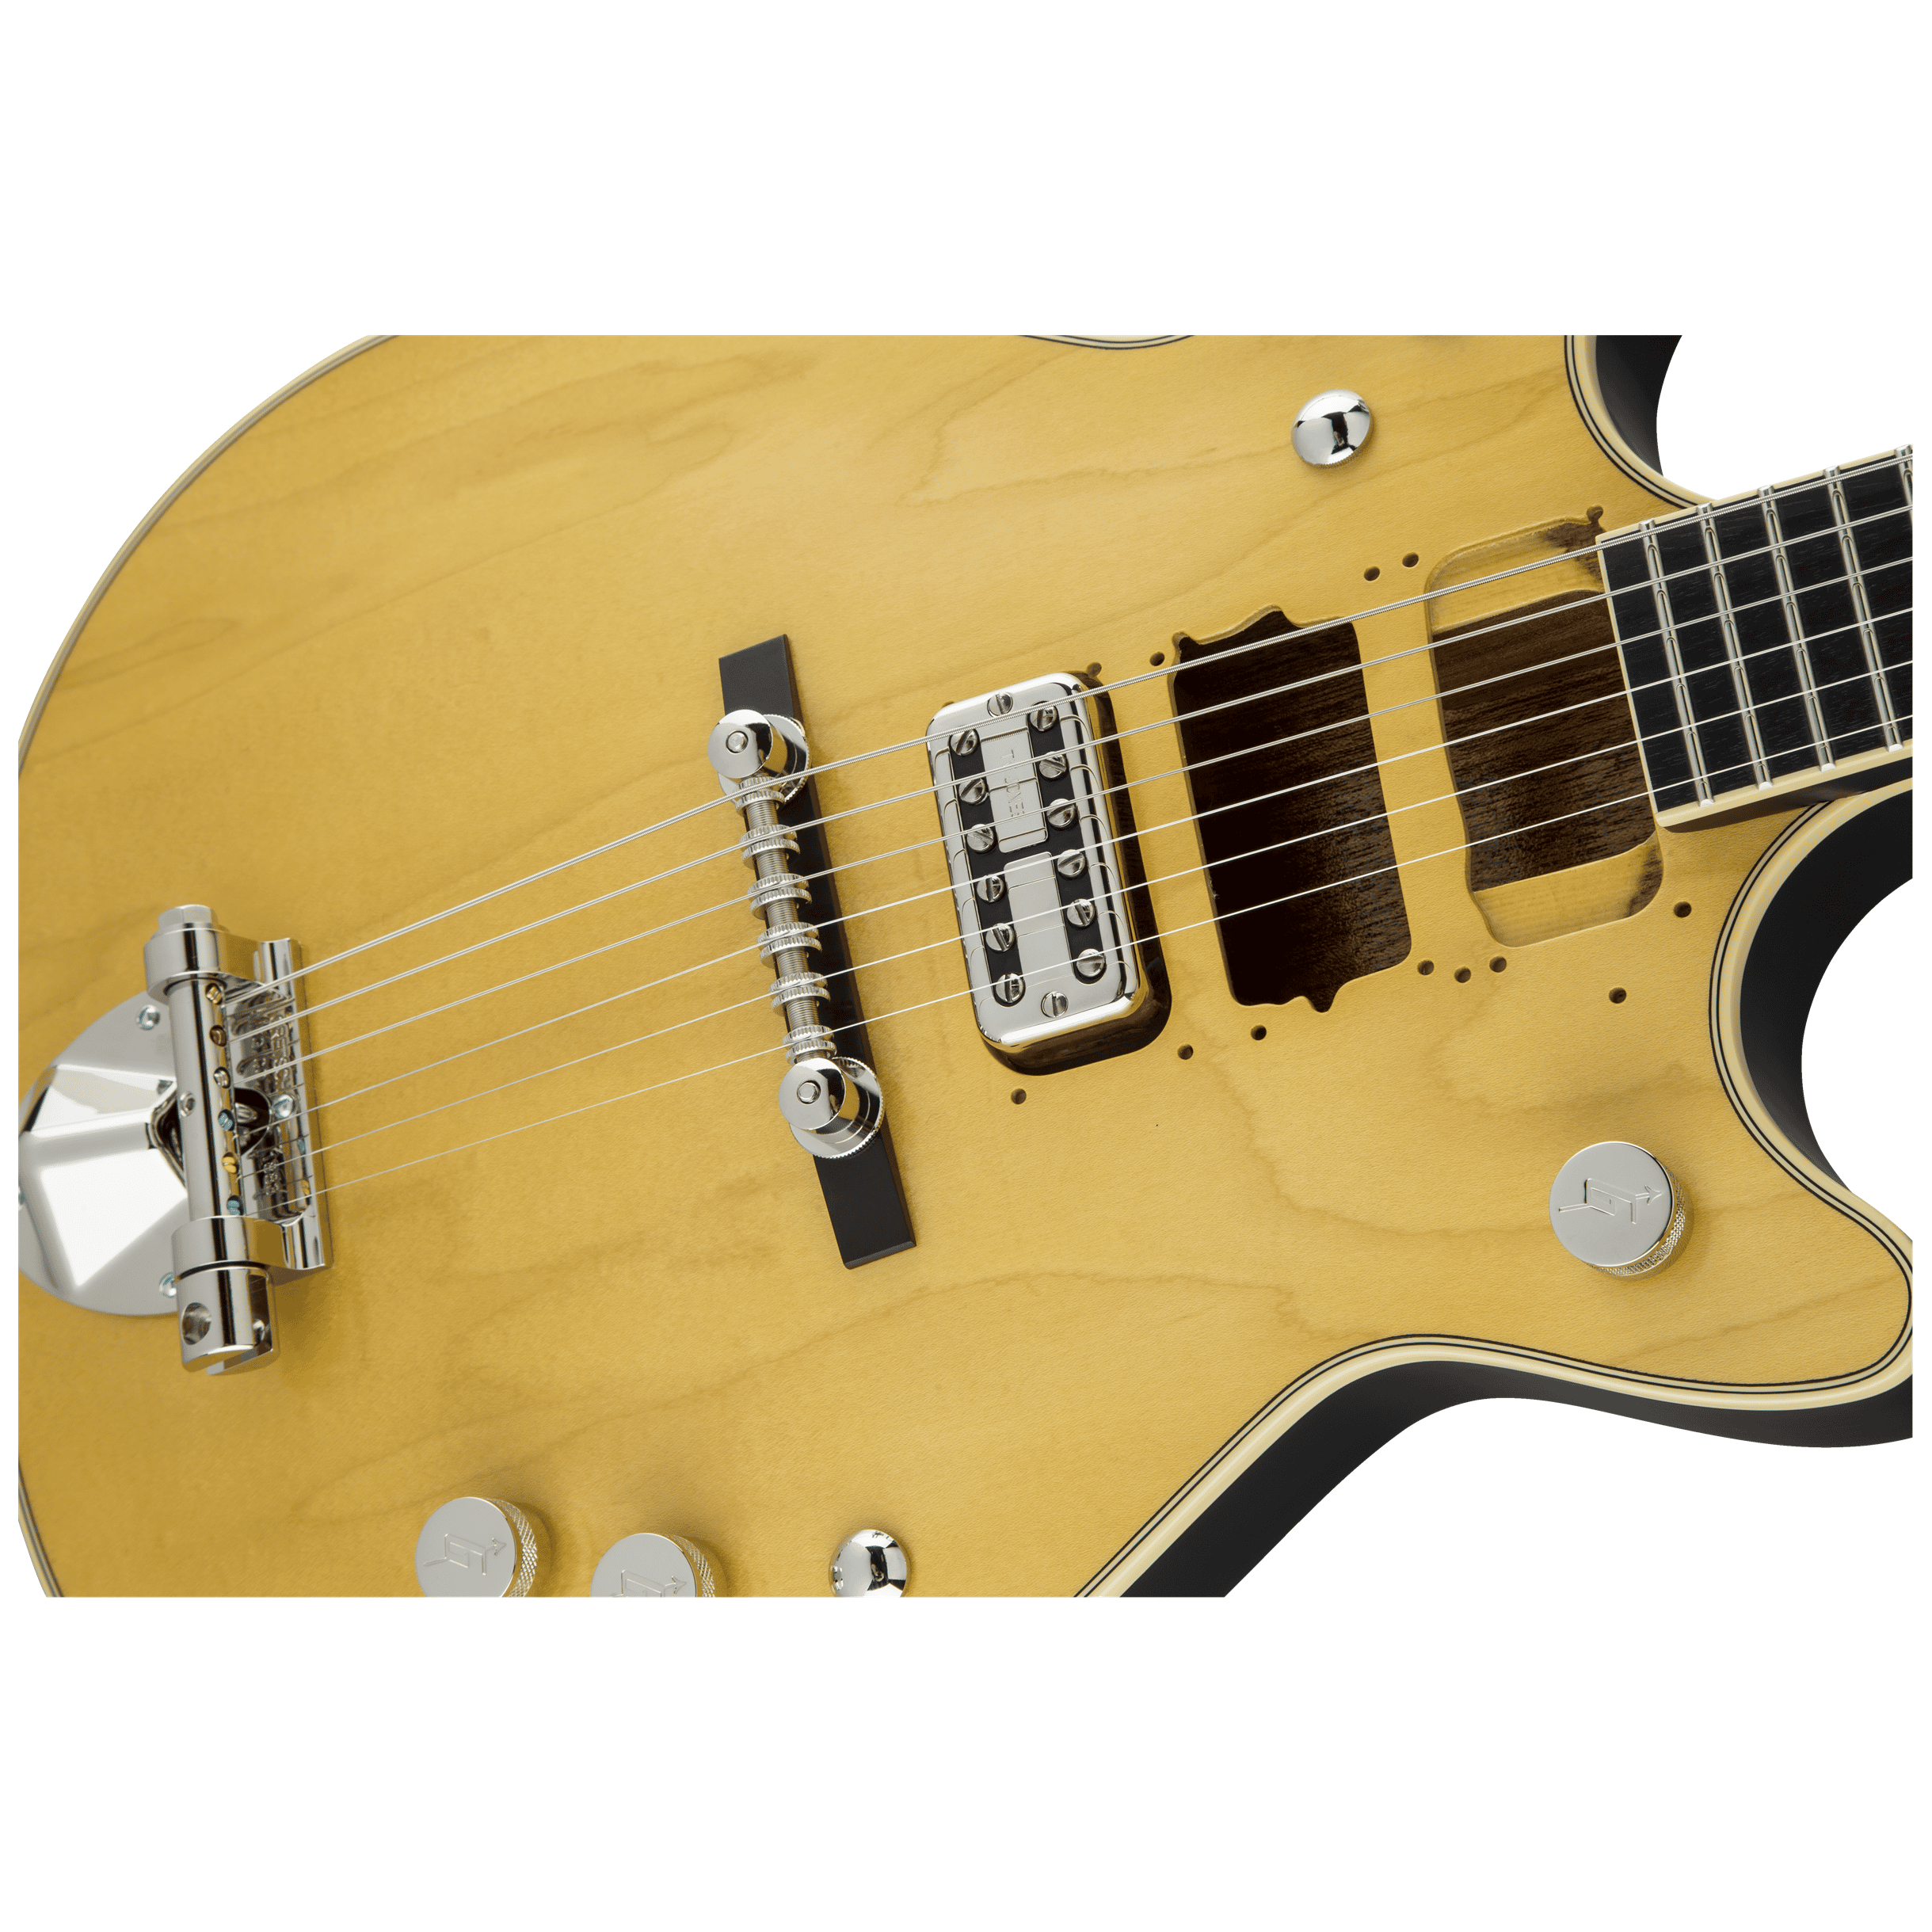 Gretsch G6131-MY Malcolm Young Signature Jet EB NAT 5